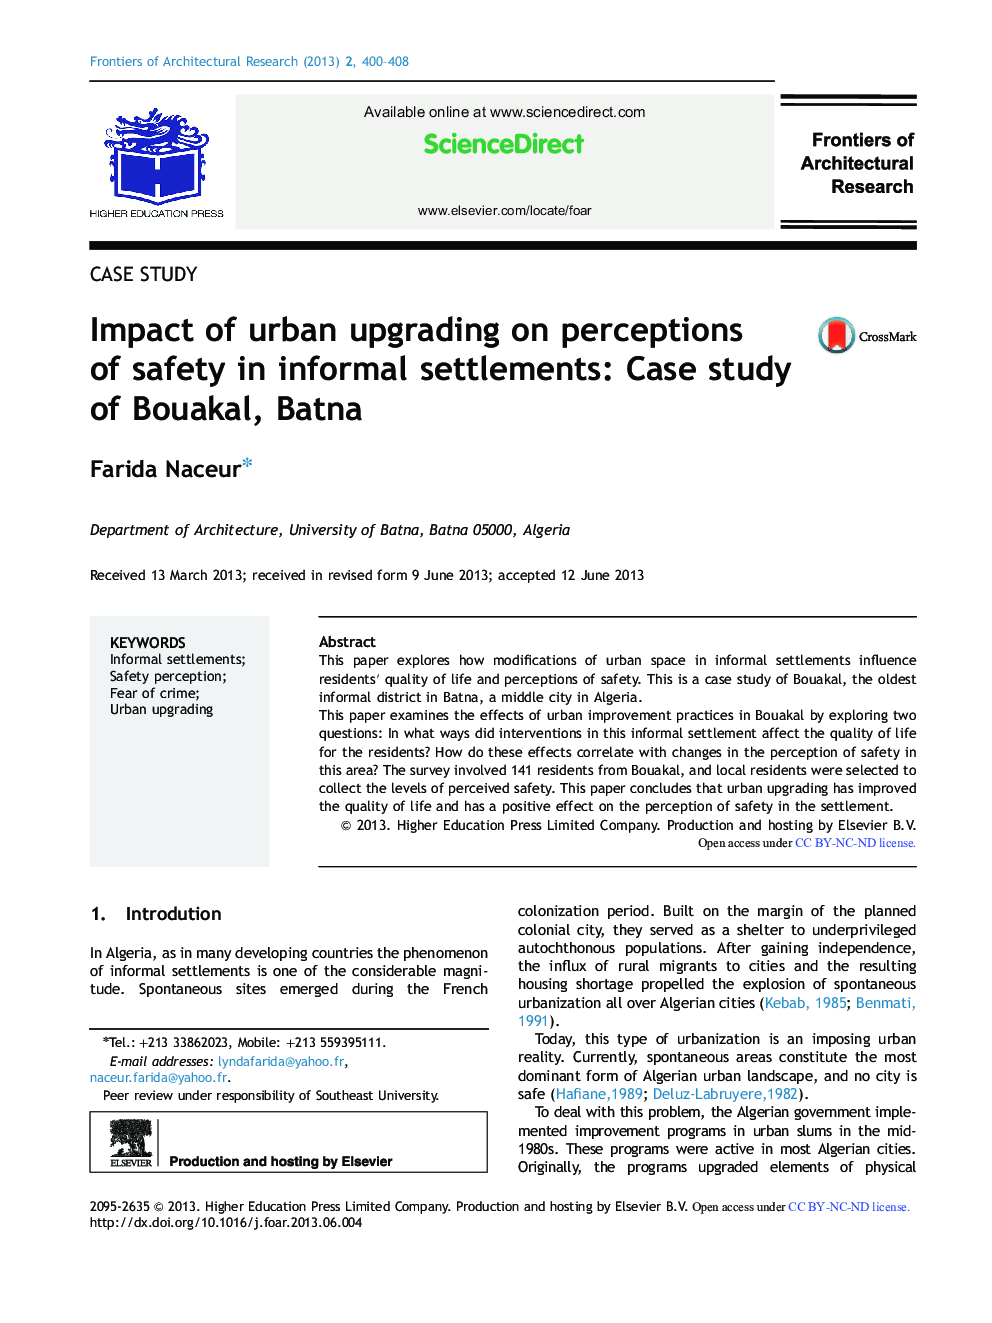 Impact of urban upgrading on perceptions of safety in informal settlements: Case study of Bouakal, Batna 